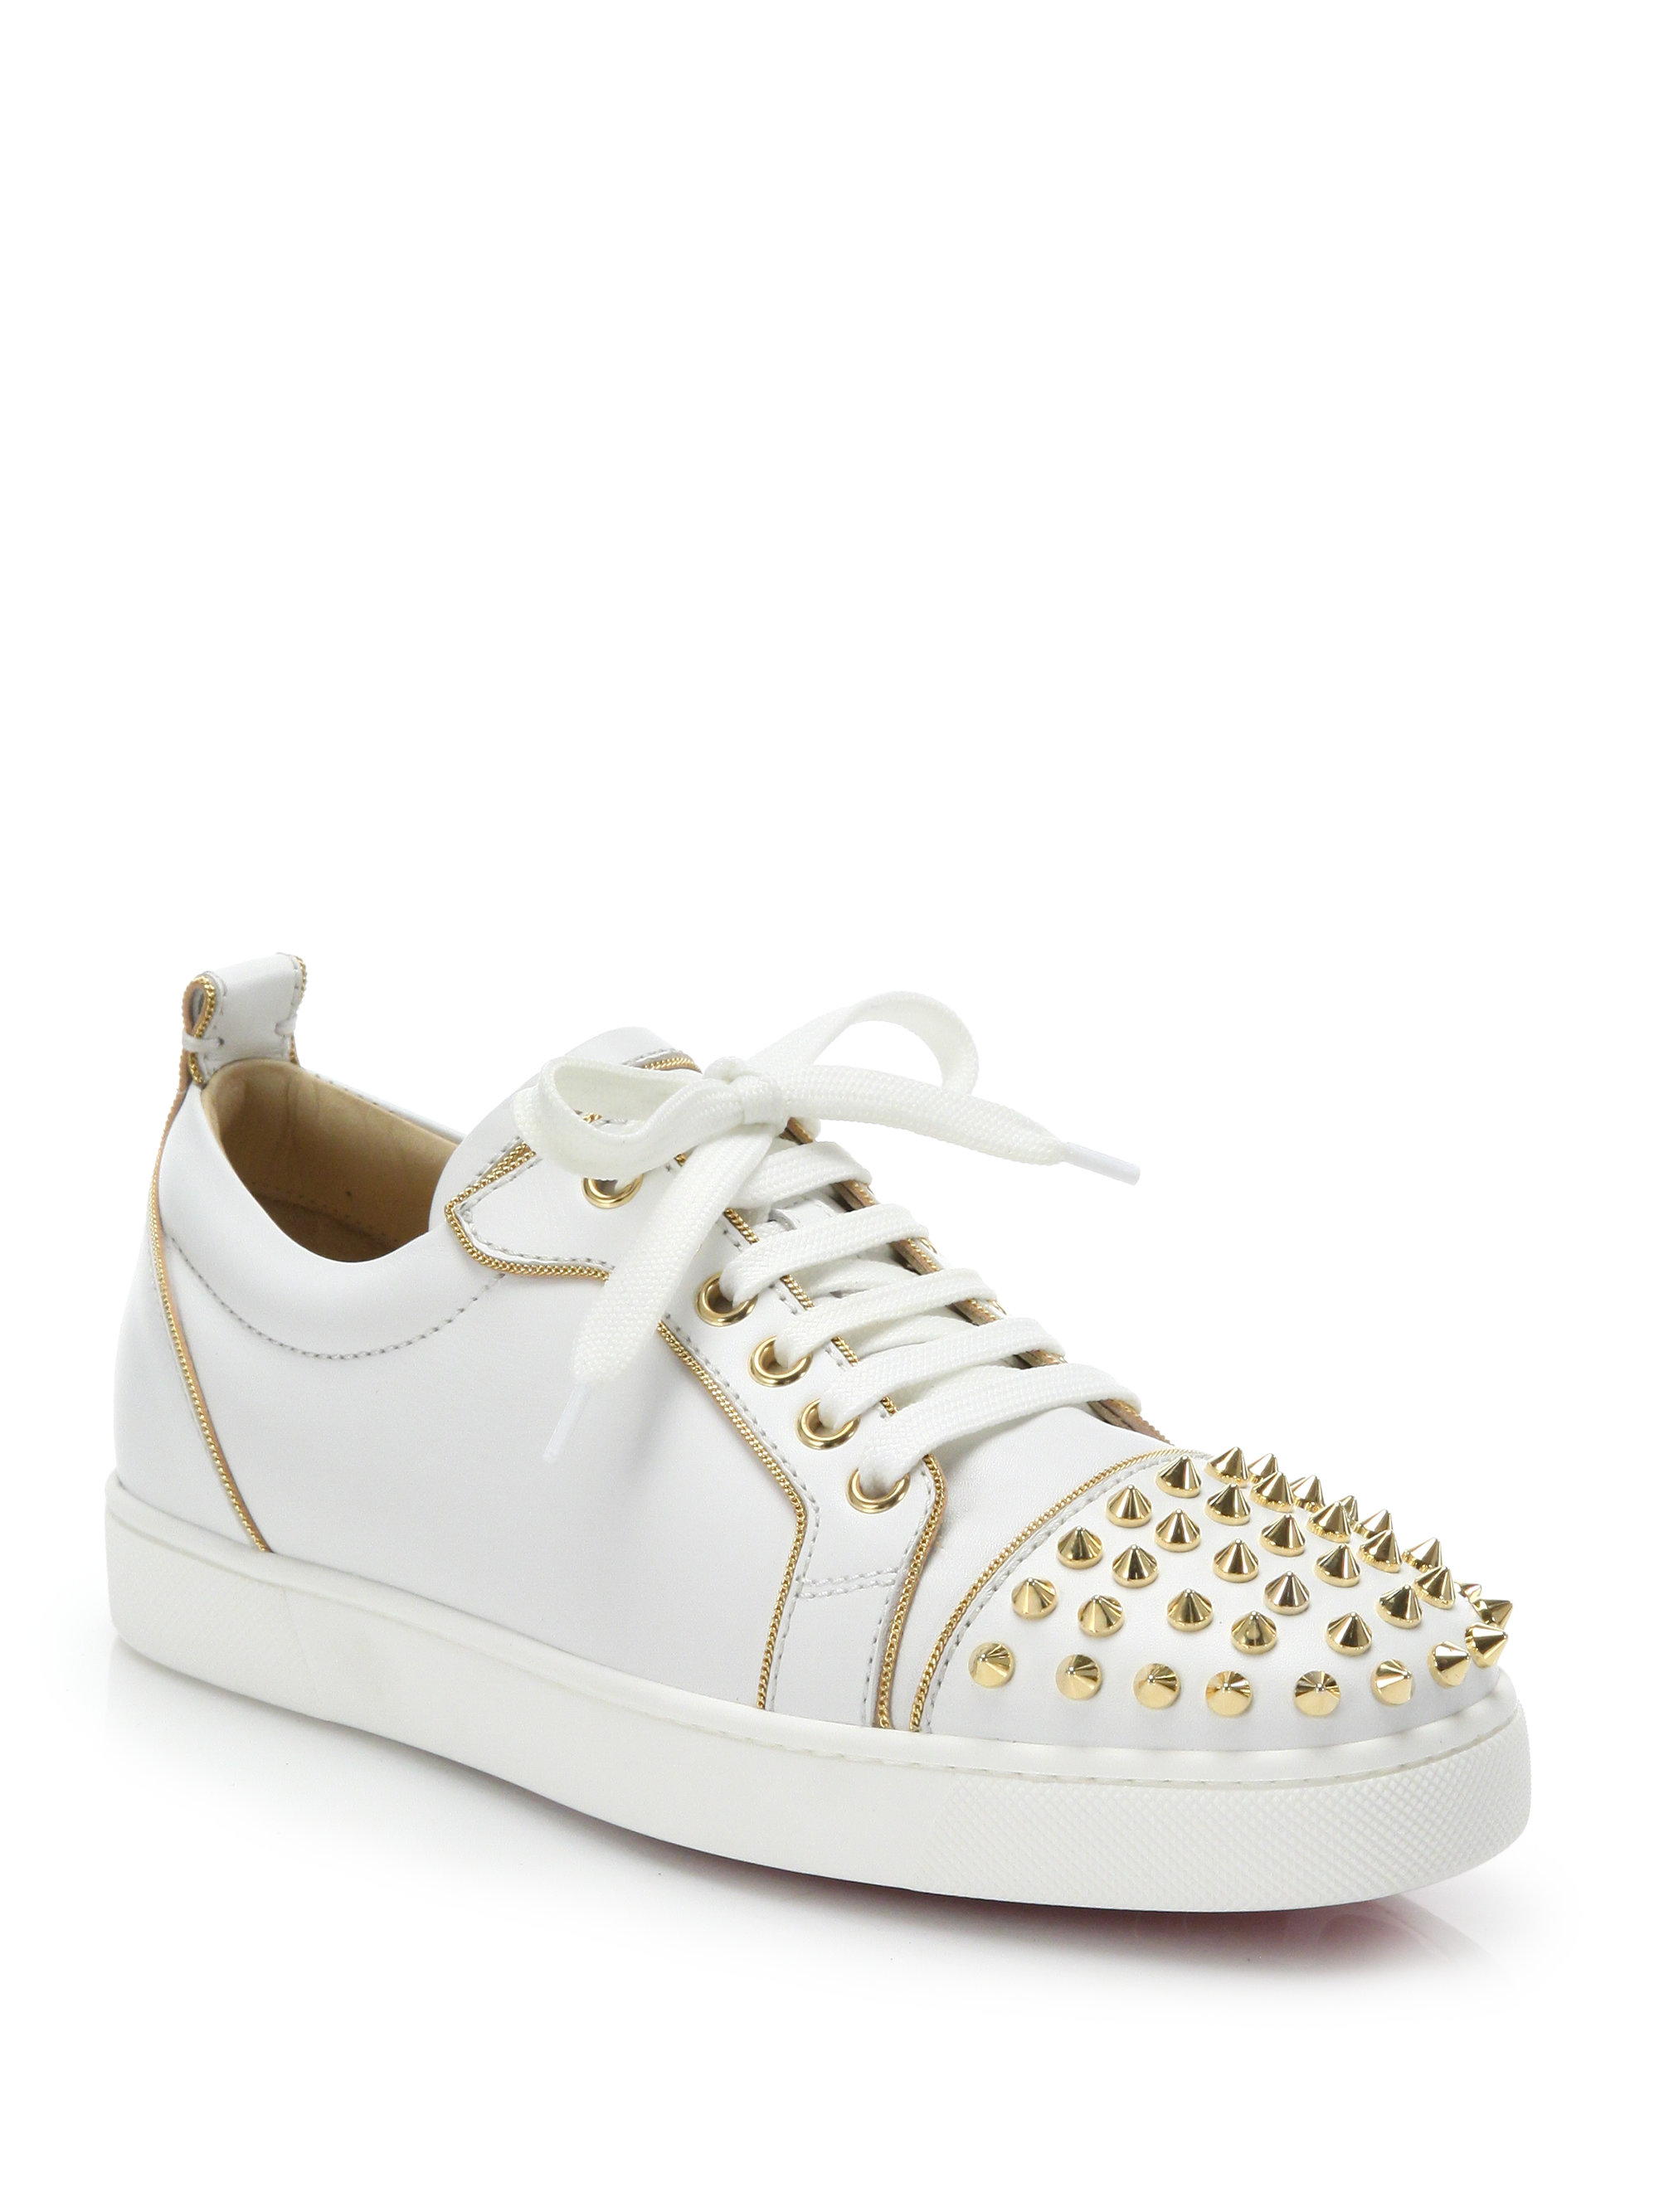 Christian louboutin Rush Studded Leather Sneakers in White (white ...  